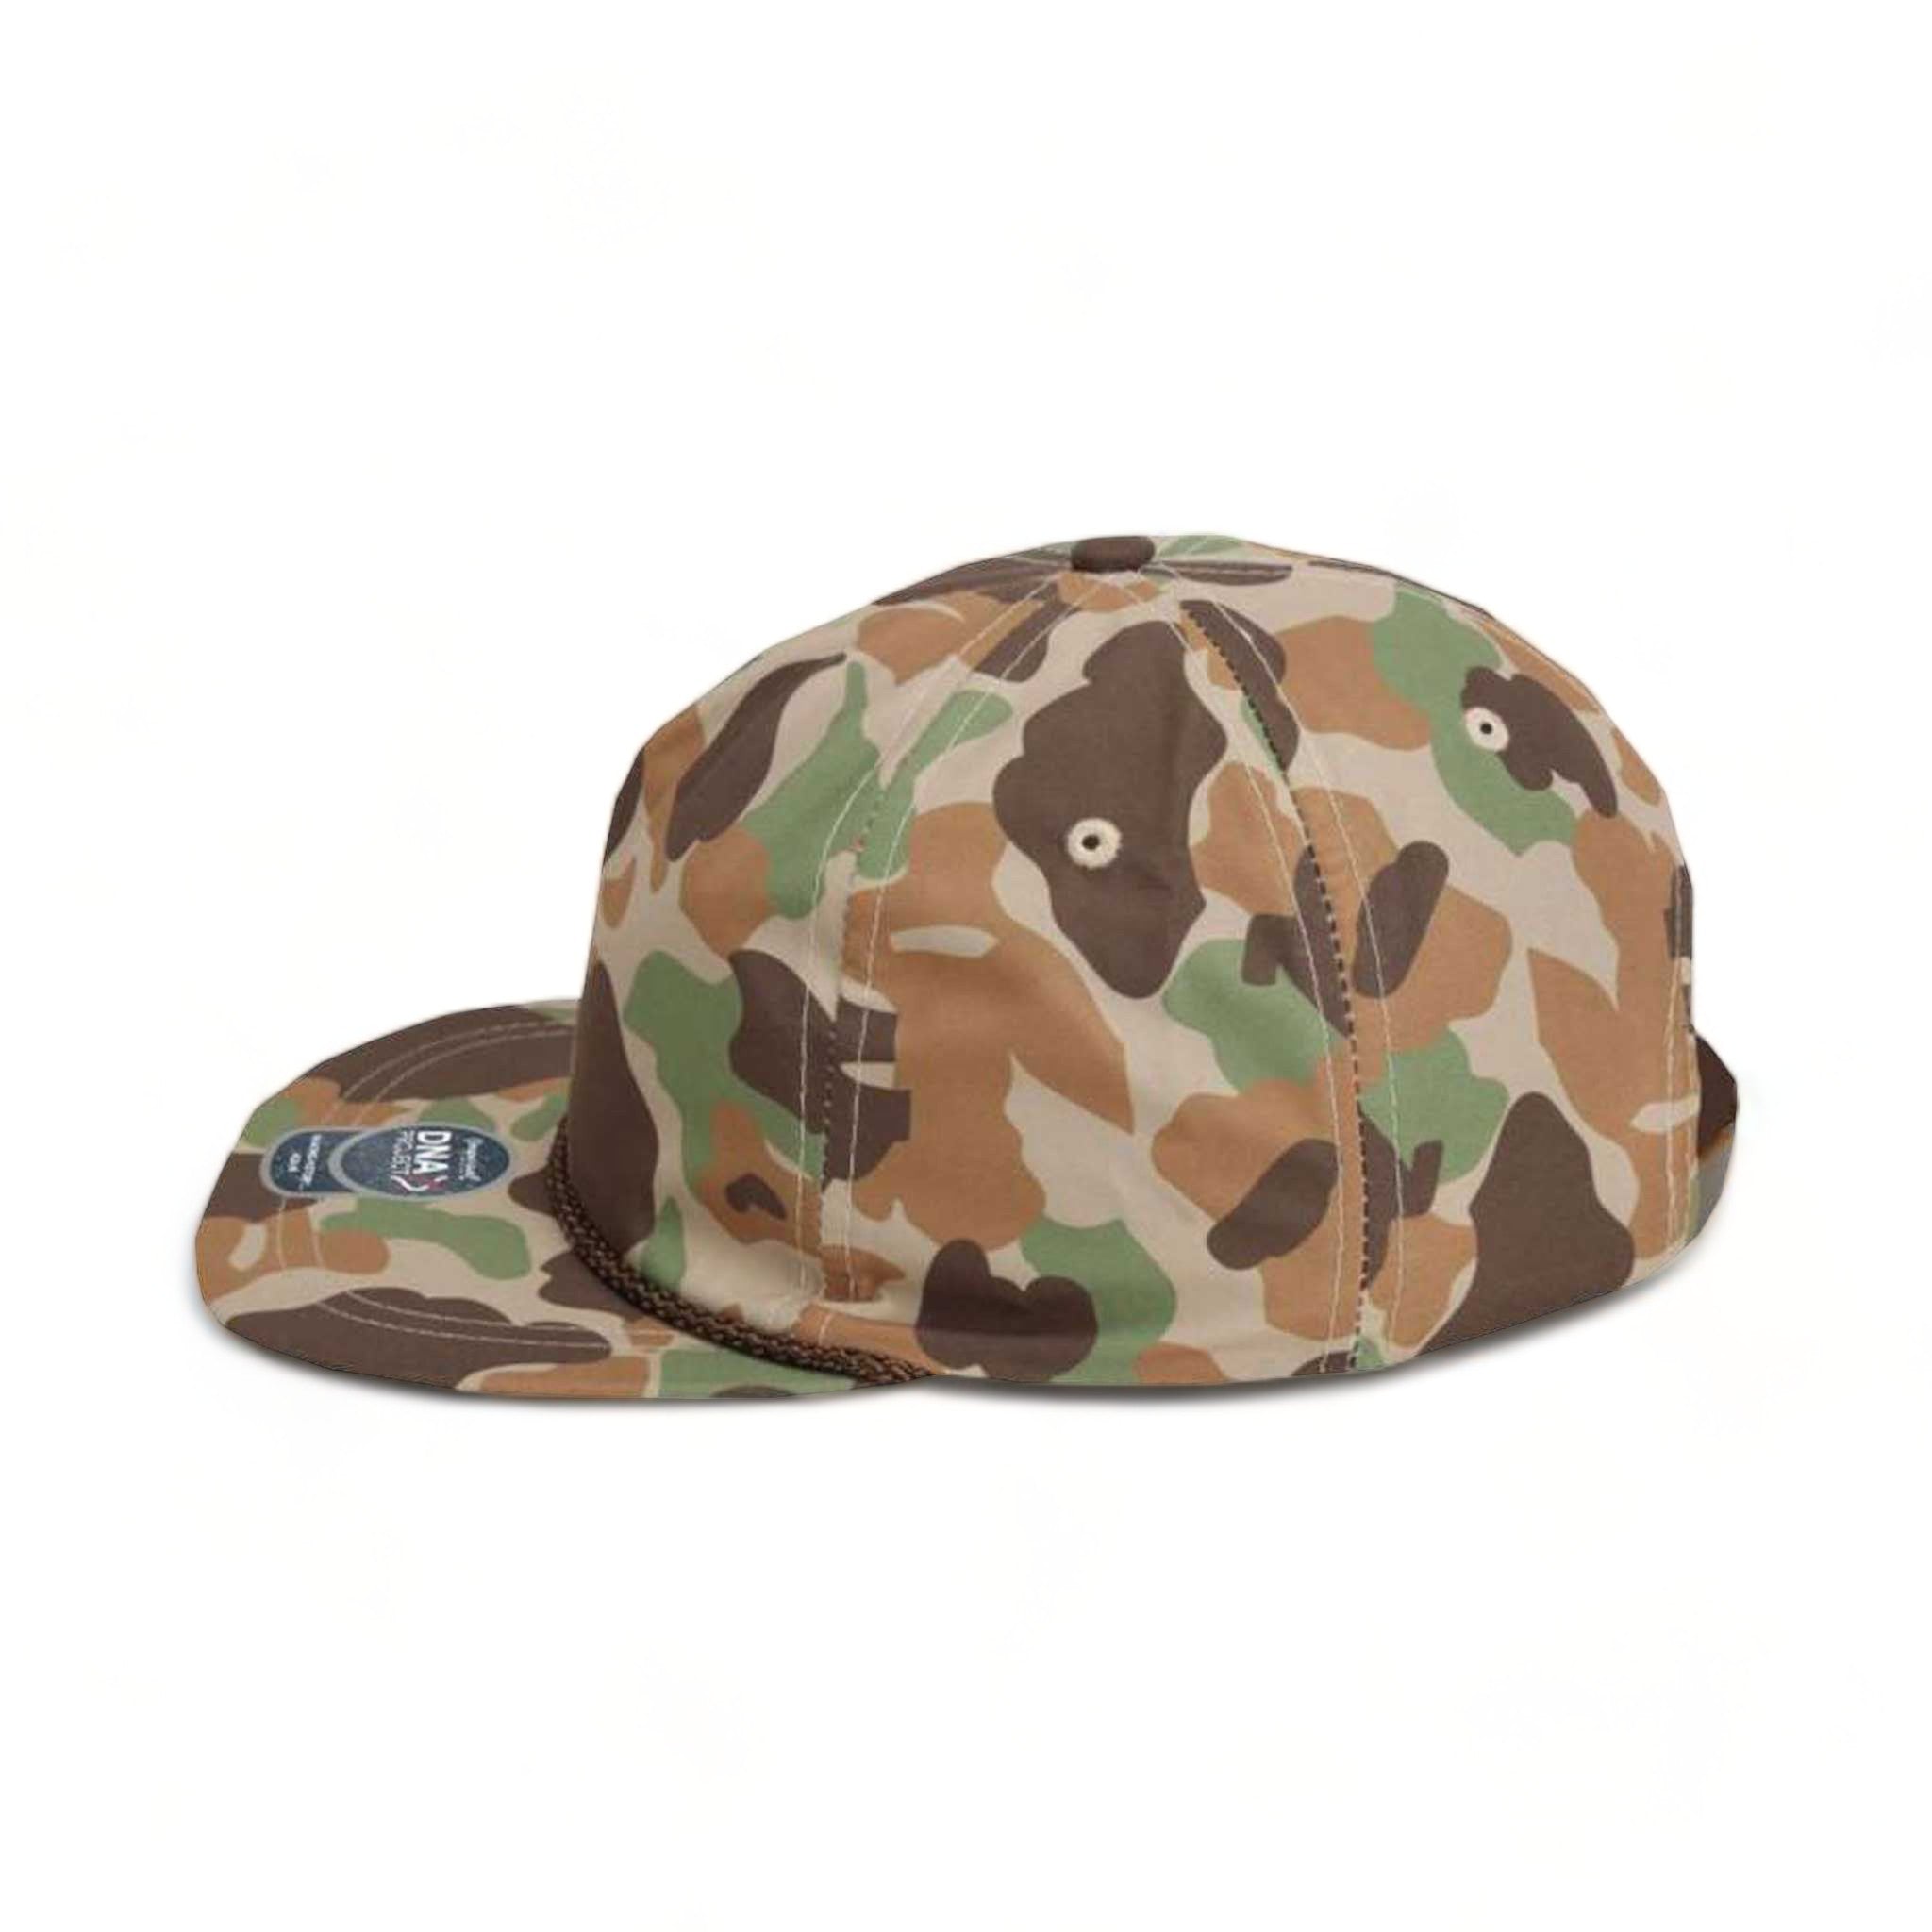 Side view of Imperial DNA010 custom hat in frog skin camo and brown